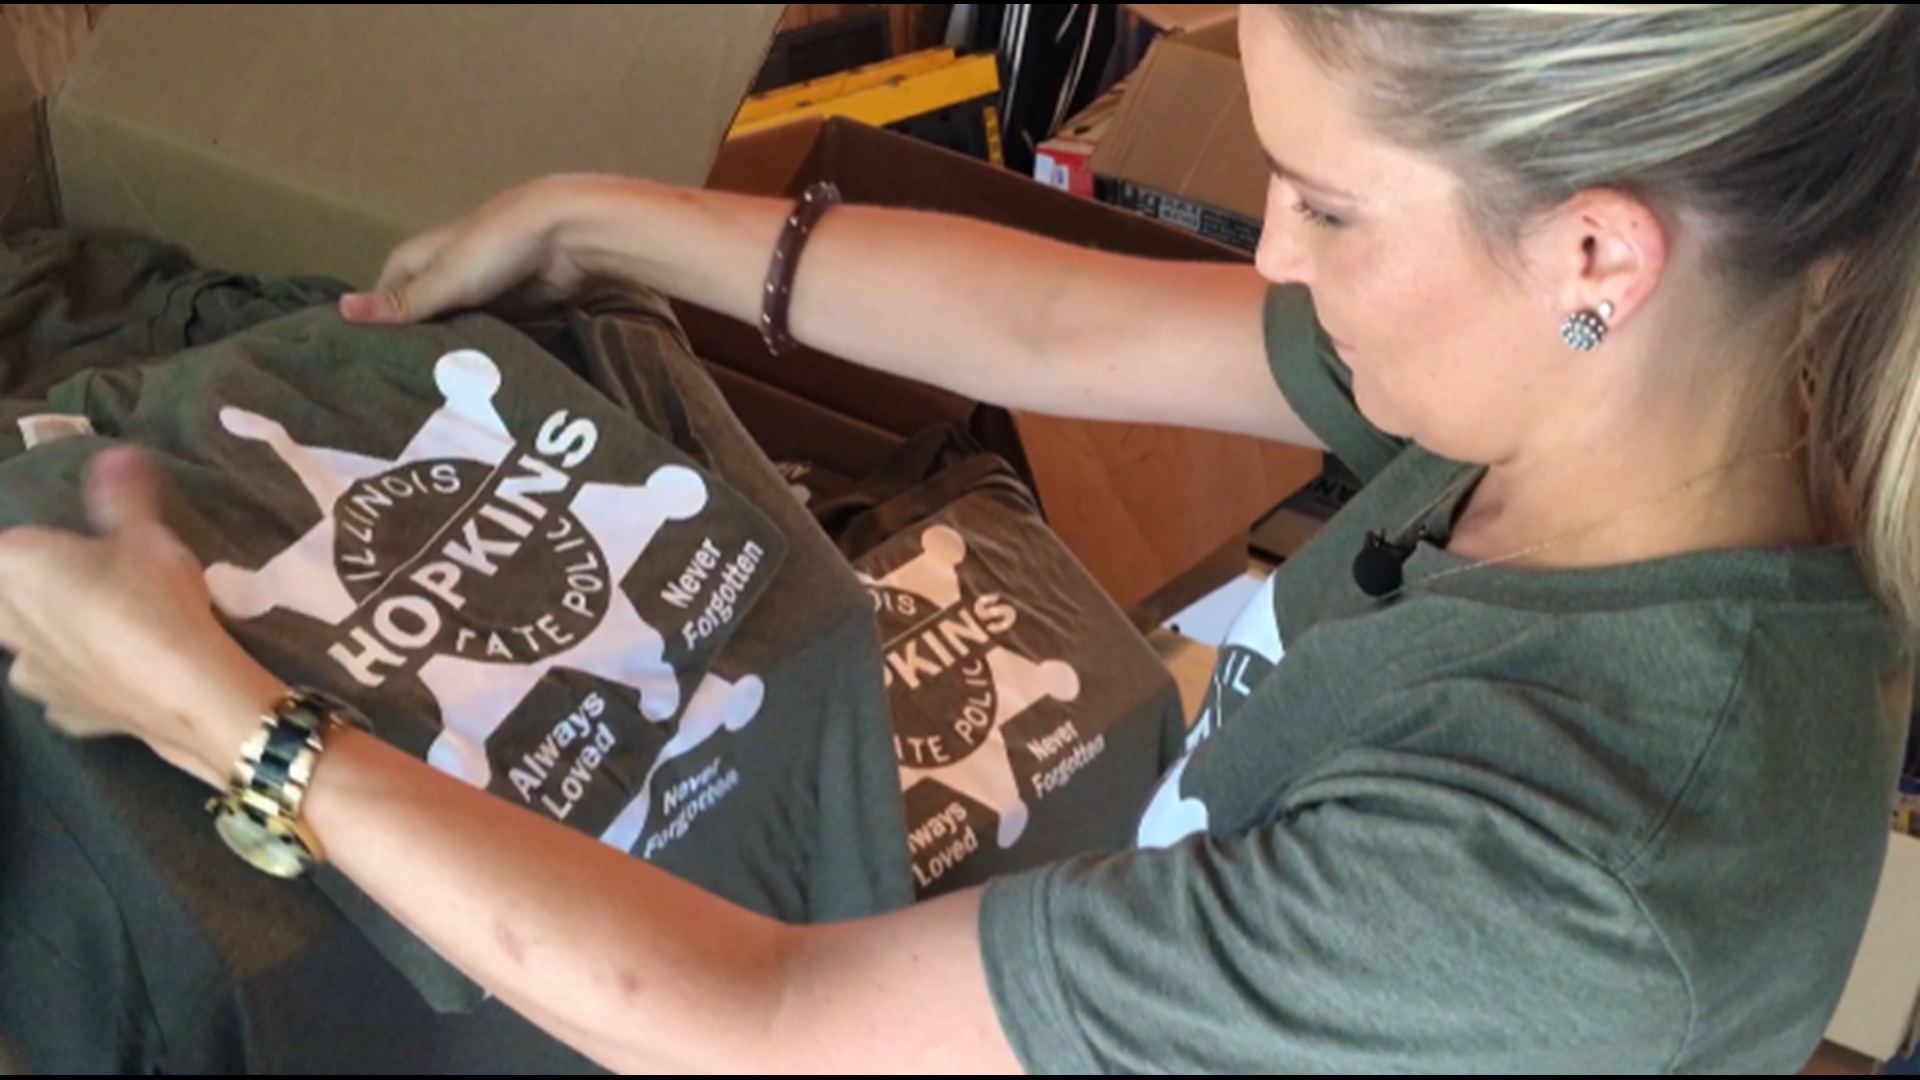 When Ashley Hewitt created t-shirts to raise funds for the Hopkins family, she had a goal: 400 shirts at $20 each. But she's closer to 4,000 orders.